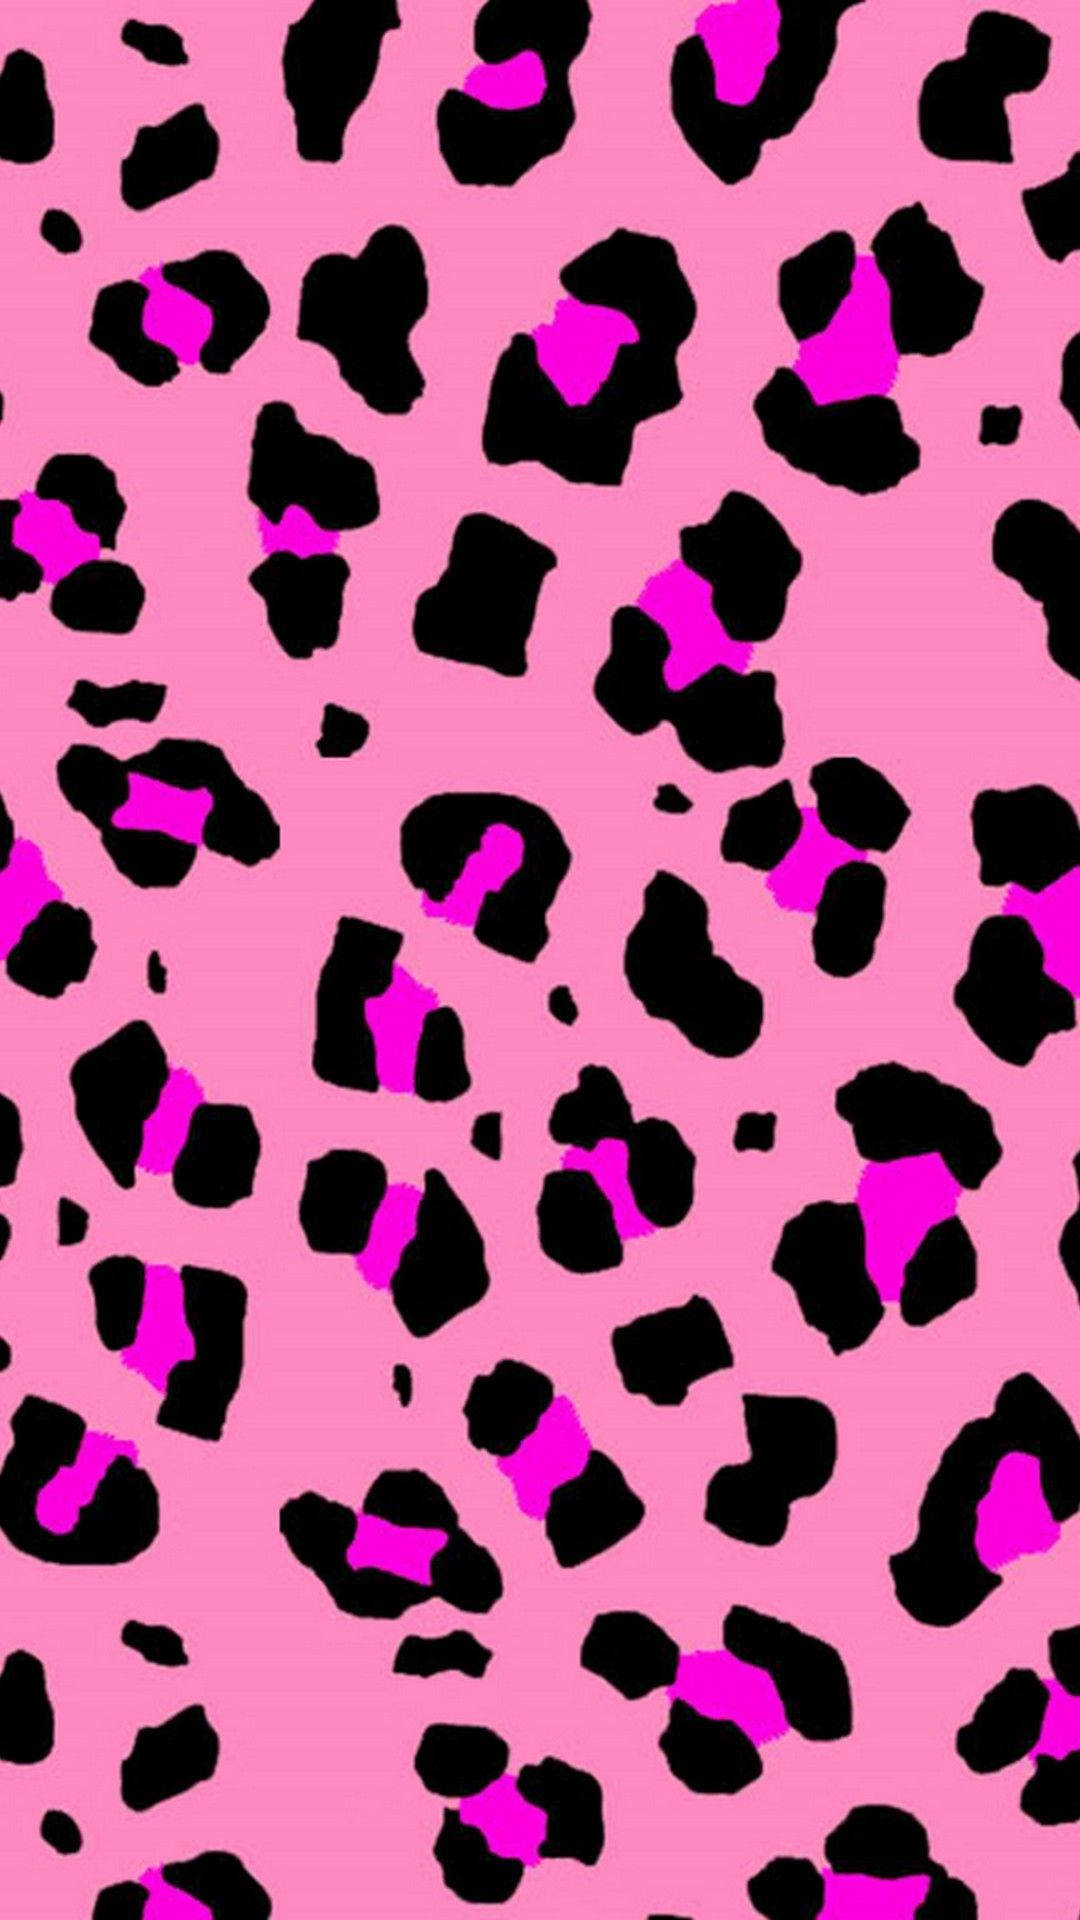 Neon Aesthetic Girly Leopard Print Background